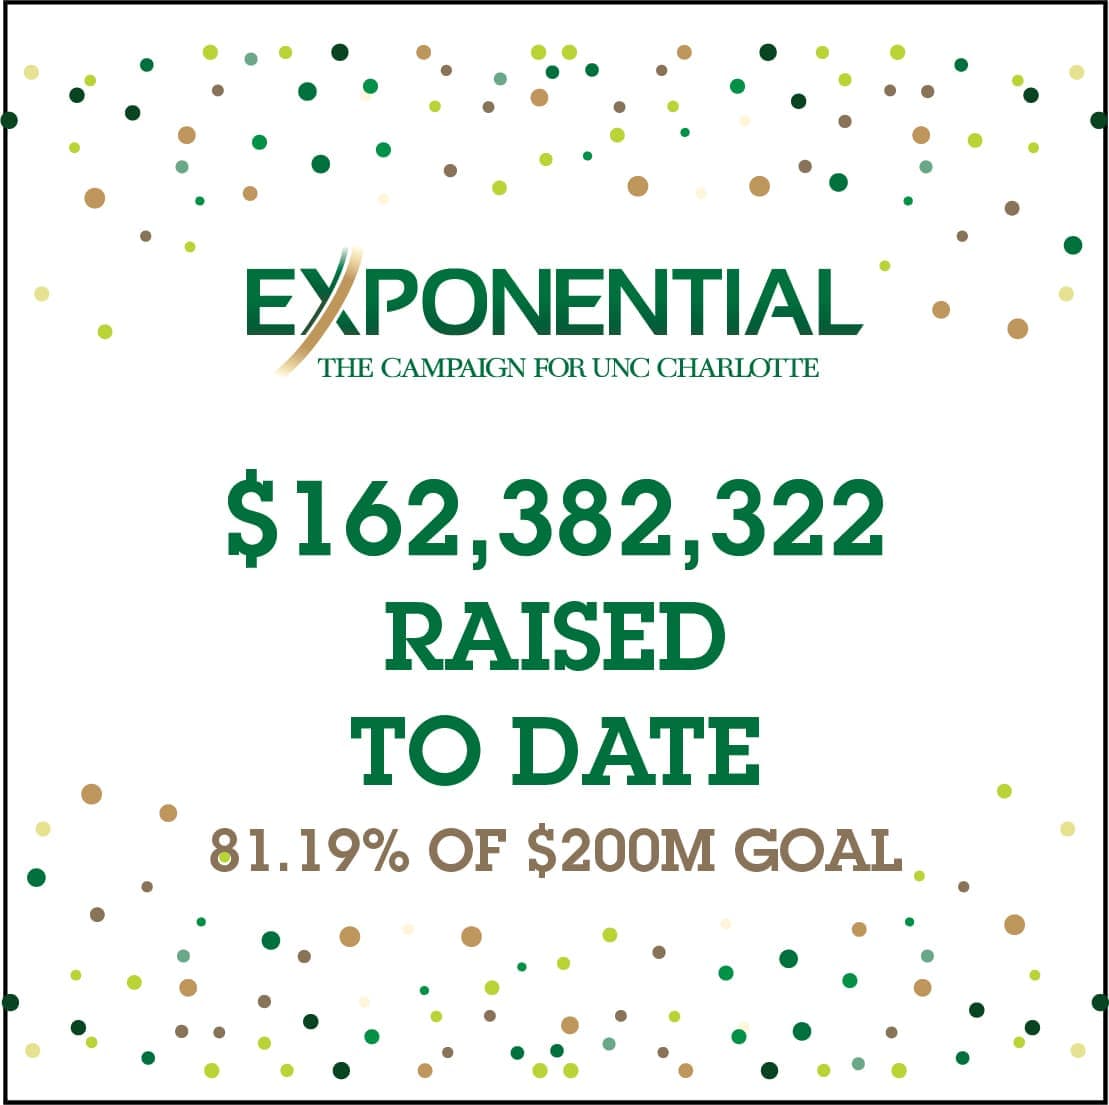 Exponential: $162,382,322 raised to date - 81.19% of $200M goal